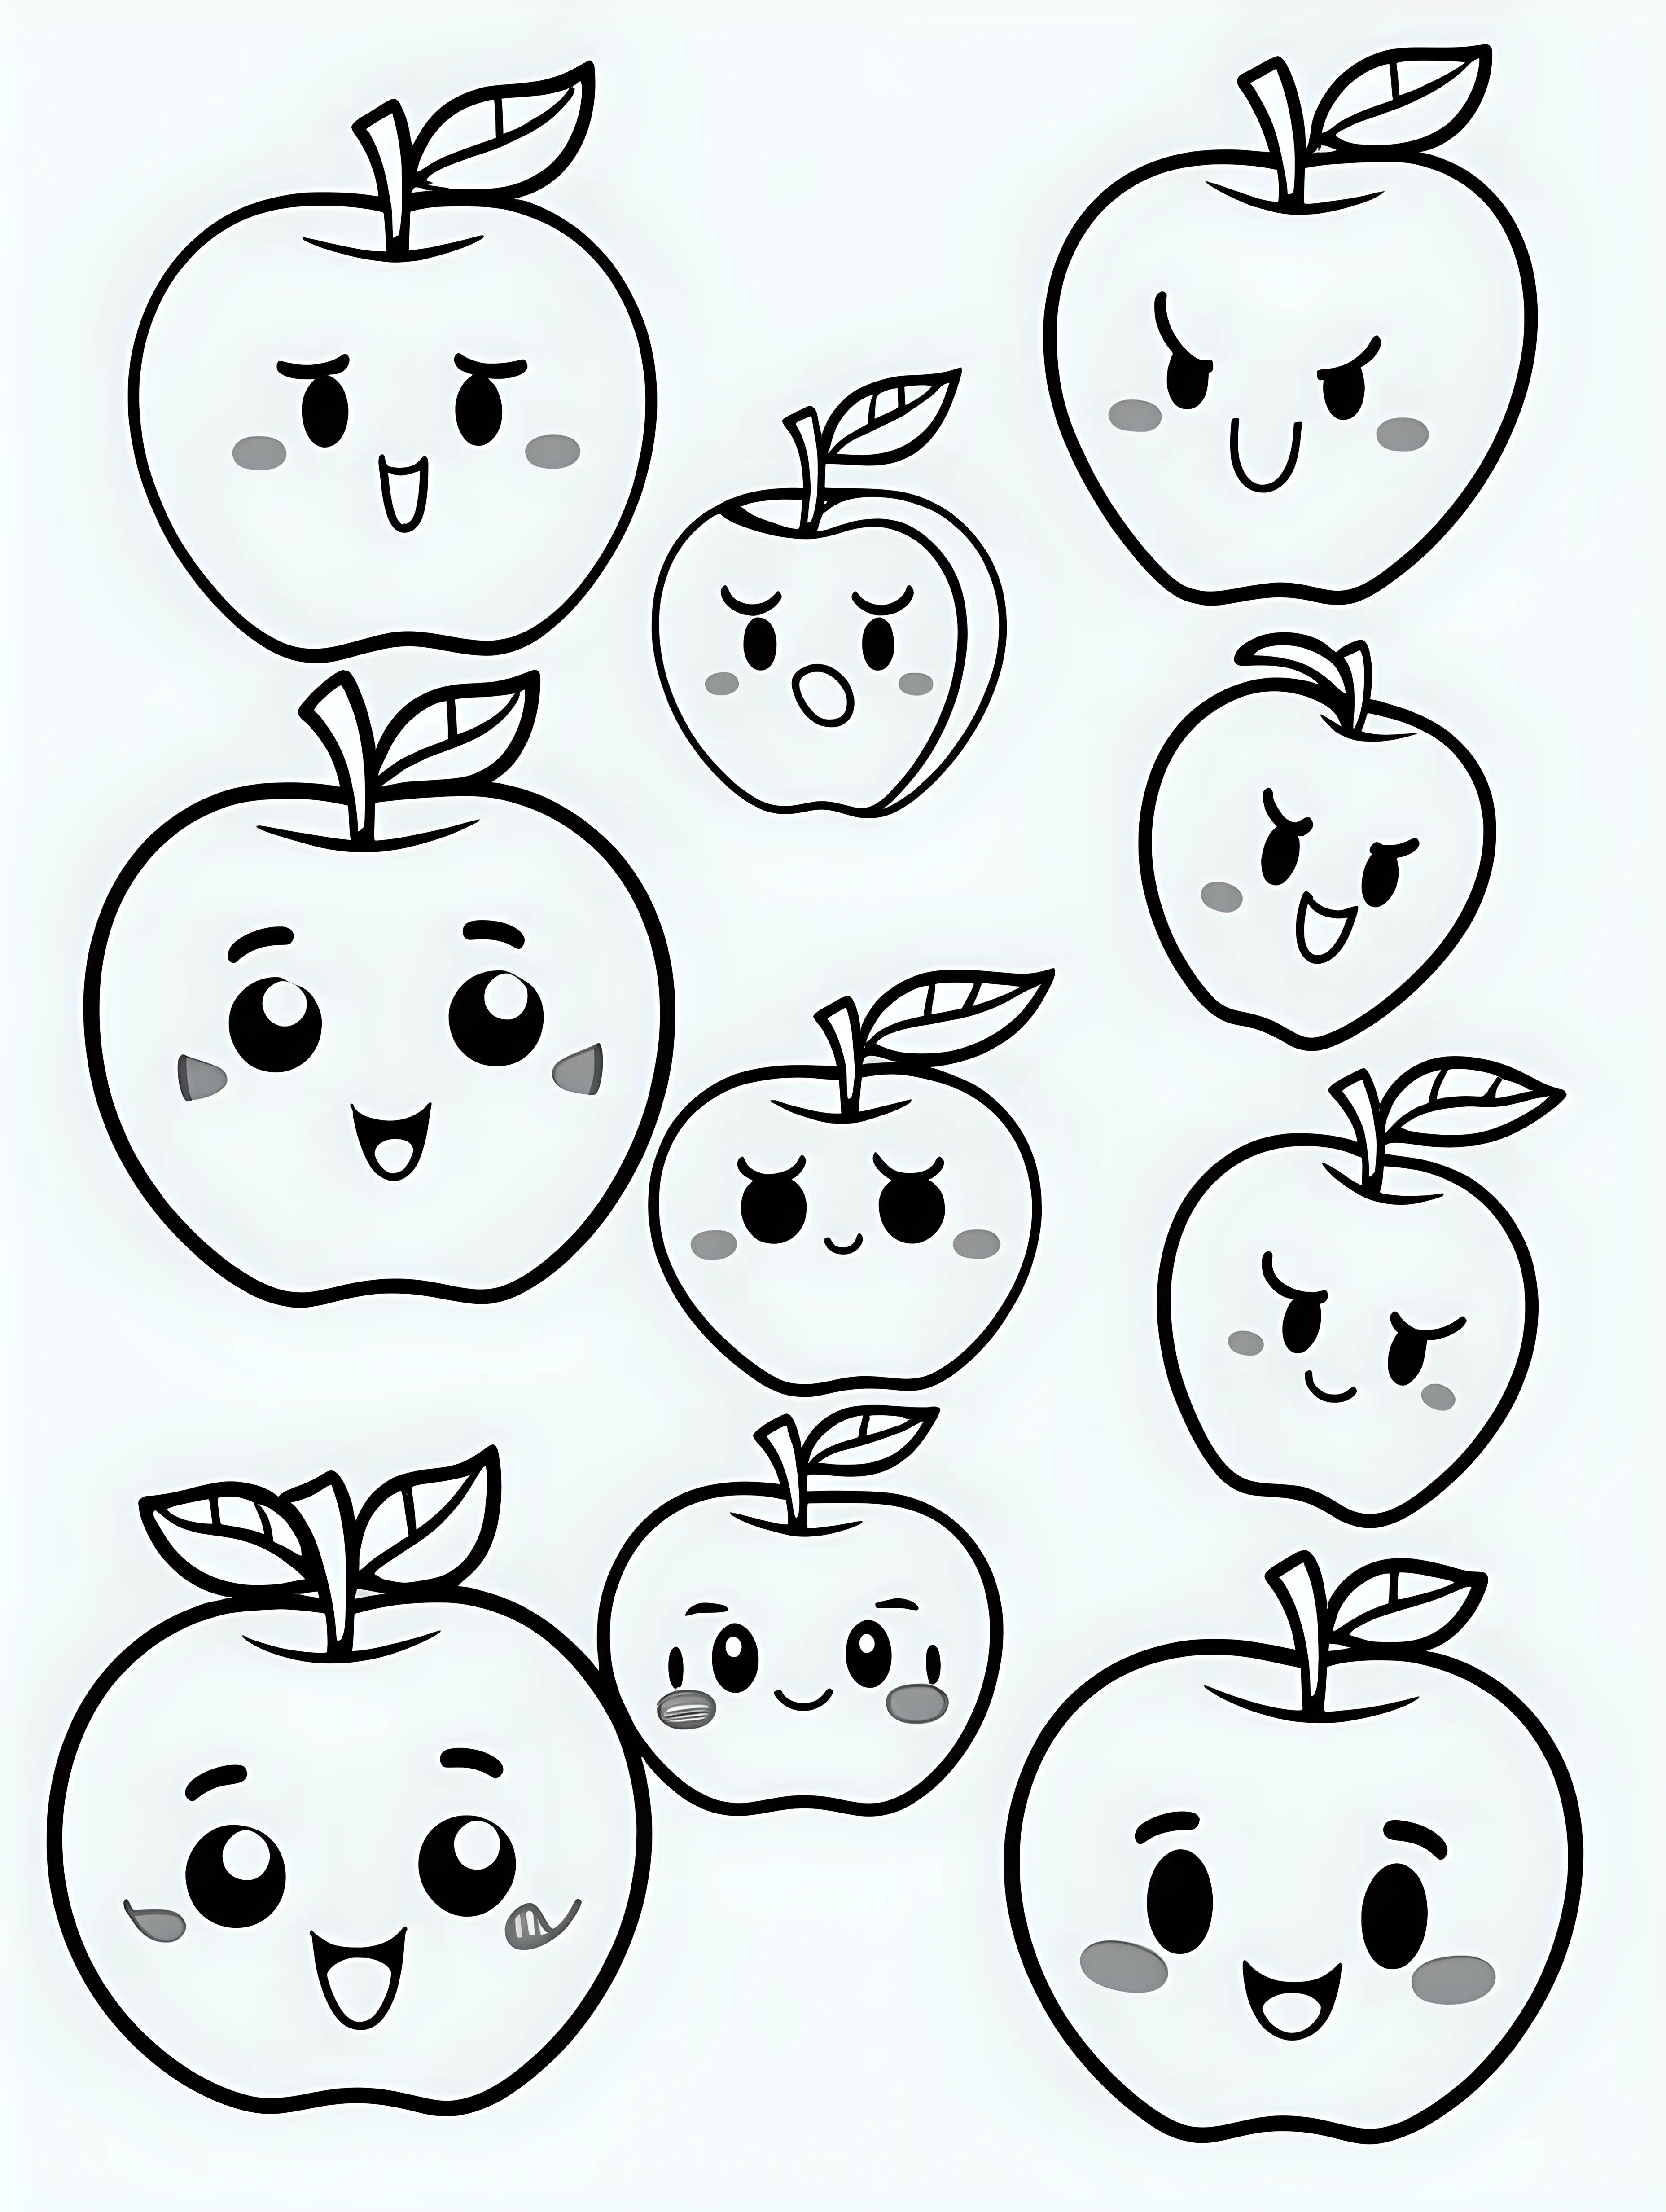 Whimsical Cartoon Coloring Book with Cute Apples and Playful Emojis